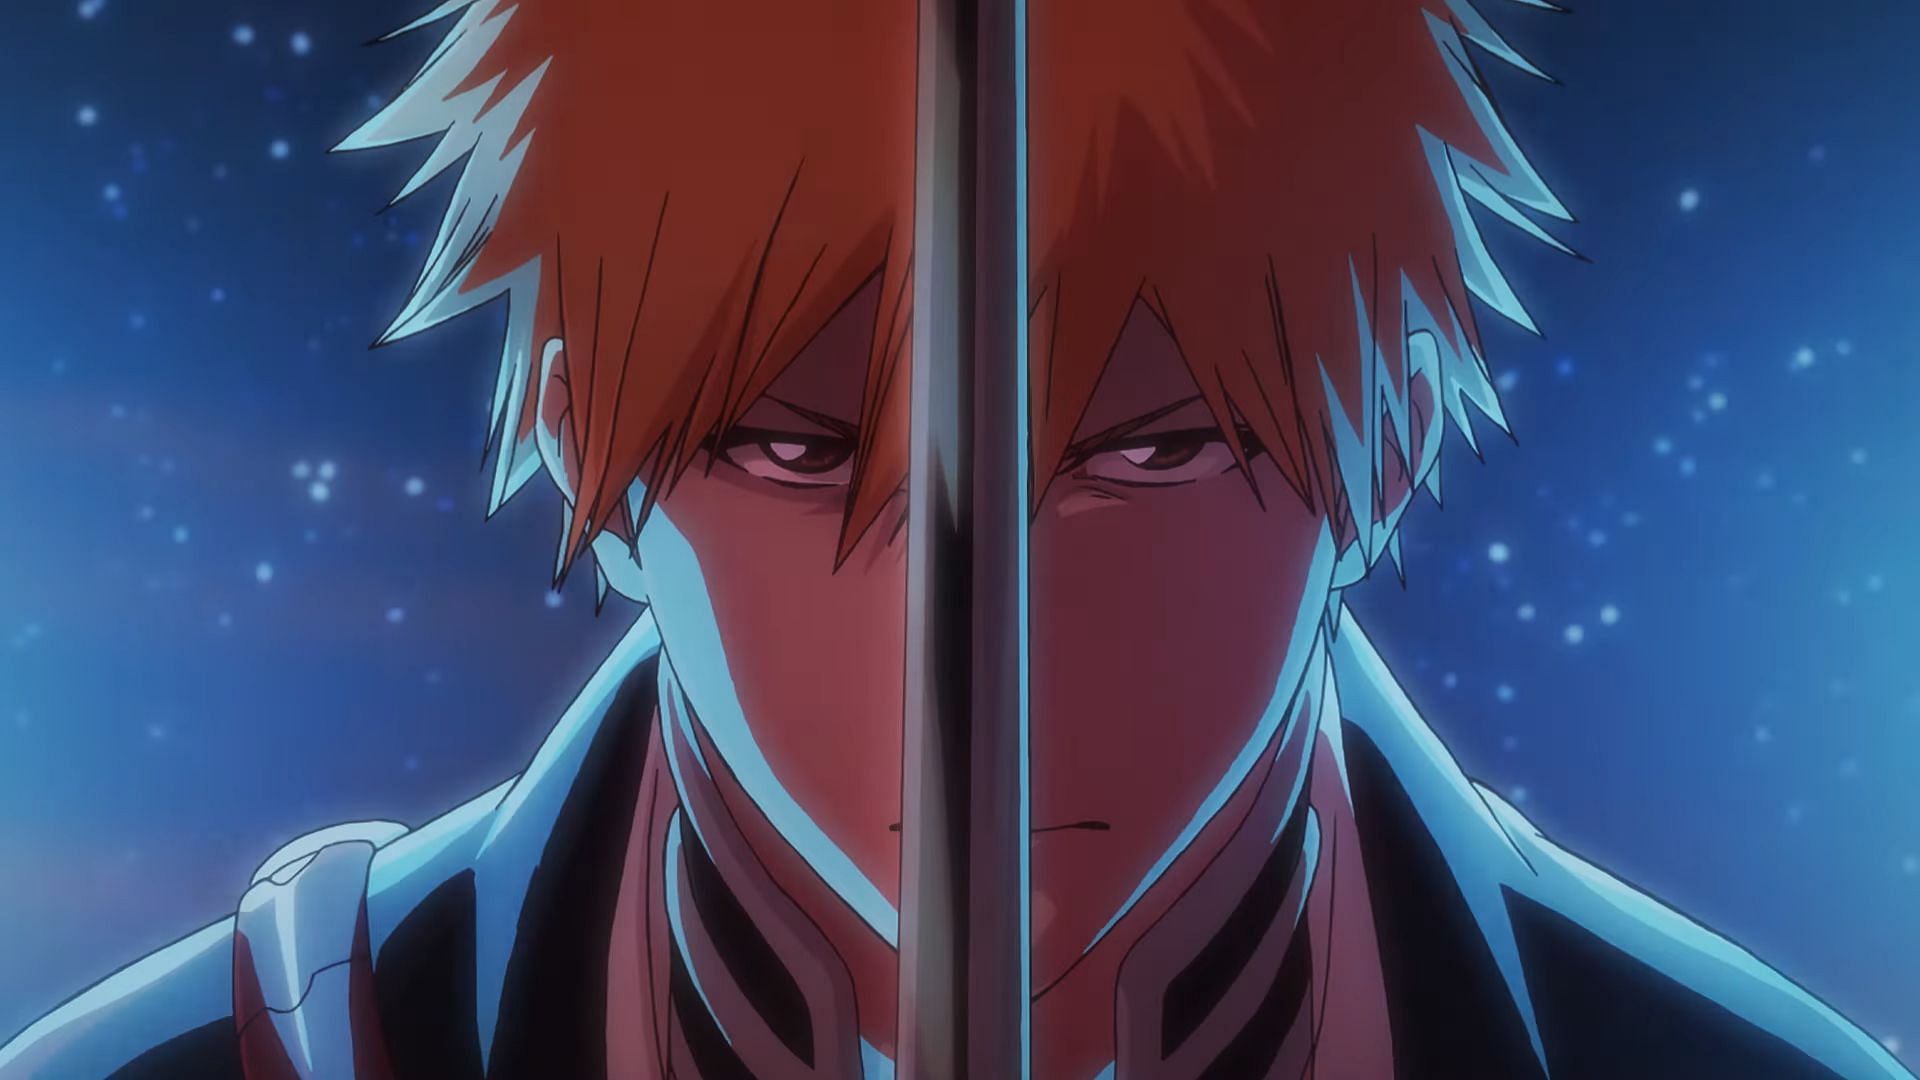 Anime AMV  Studio ufotable will be assisting in animating Bleach TYBW  episode 19  rukia vs asnodt will be legendary if that is the case   Facebook